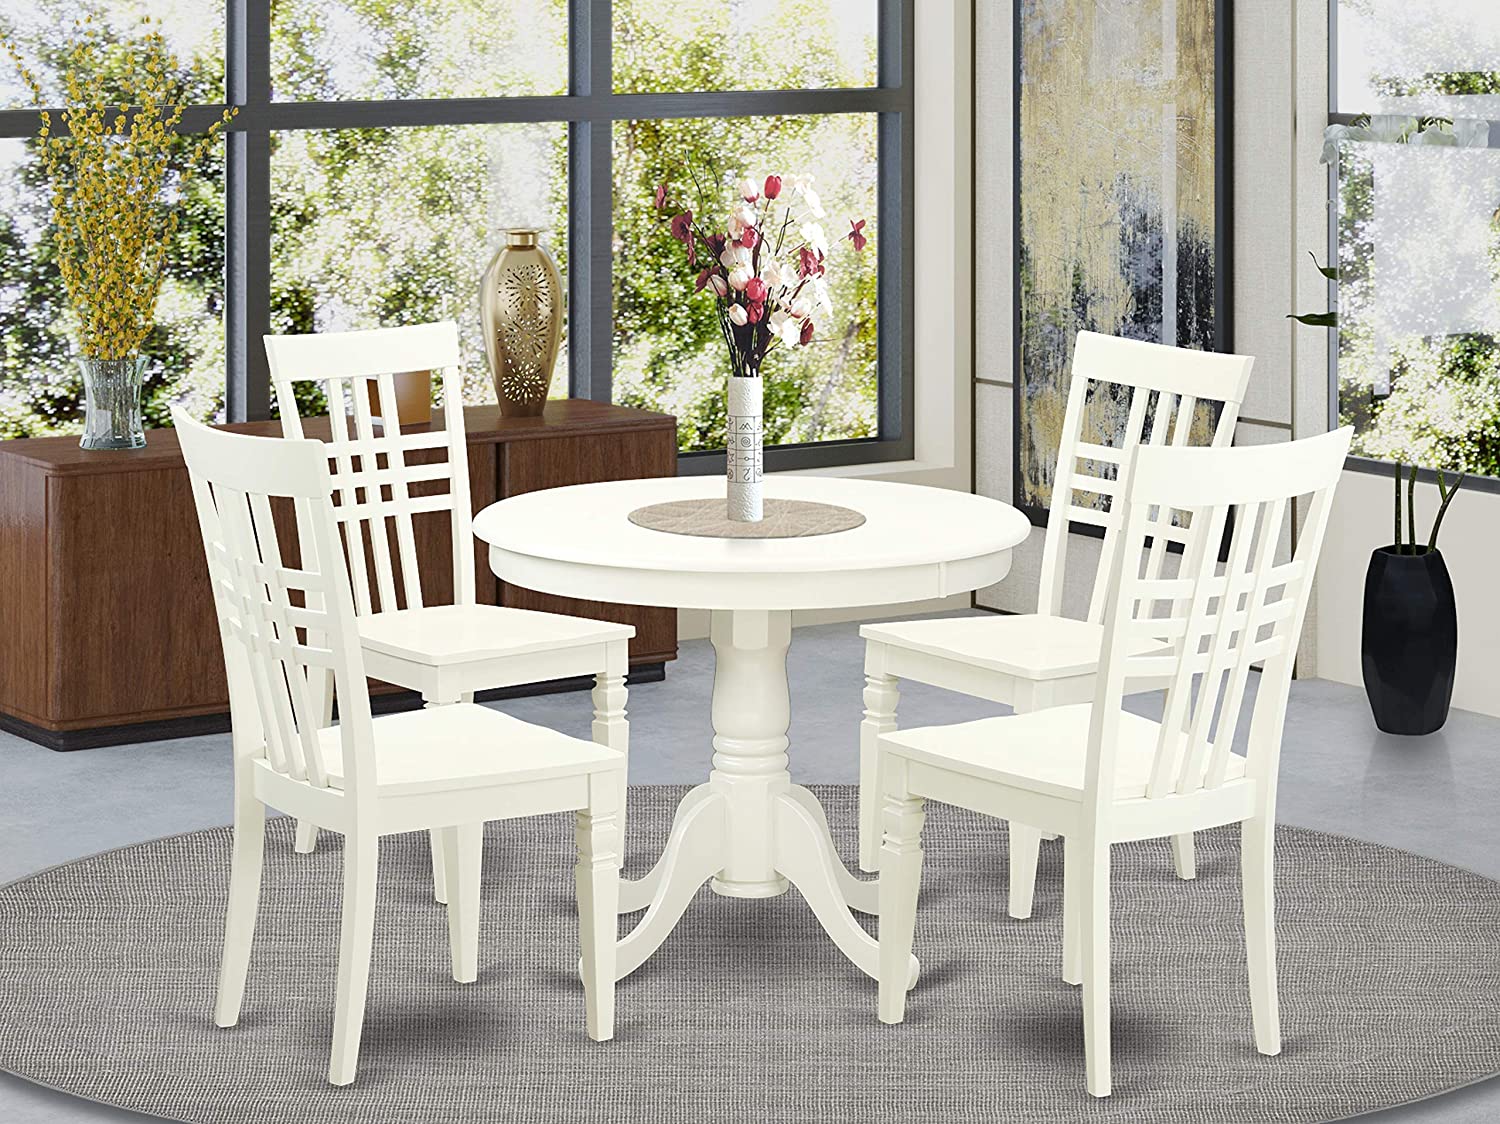 East West Furniture Dining Set- 4 Fantastic Dining Room Chairs - A Wonderful Kitchen Table- Wooden Seat and Linen White Round Wooden Table